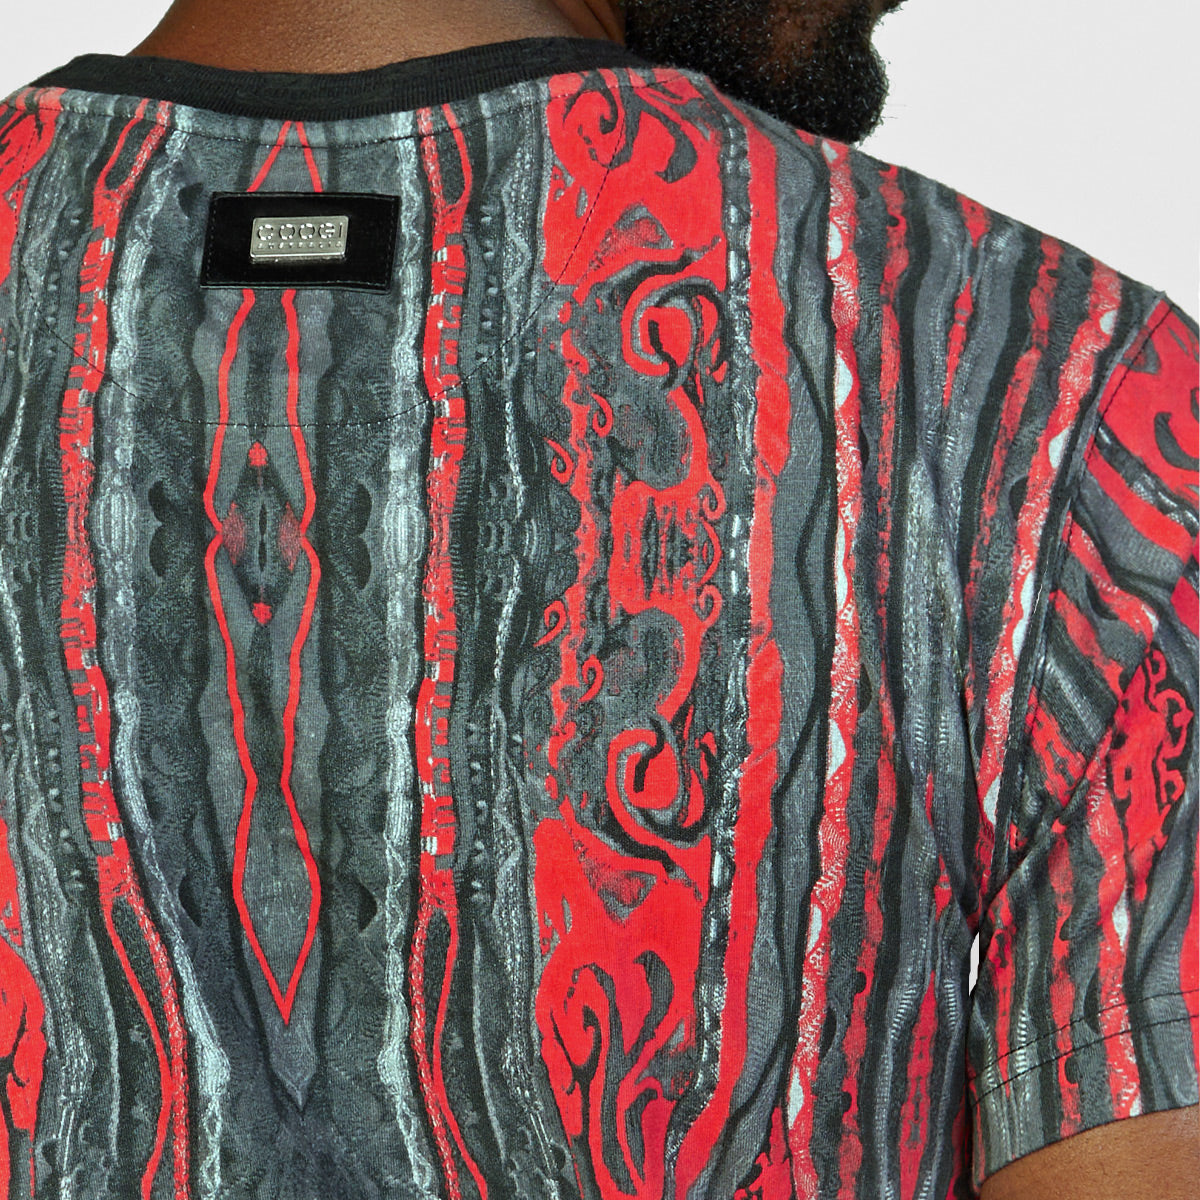 COOGI CLASSIC RED-BLACK ALL-OVER CREW NECK TEE